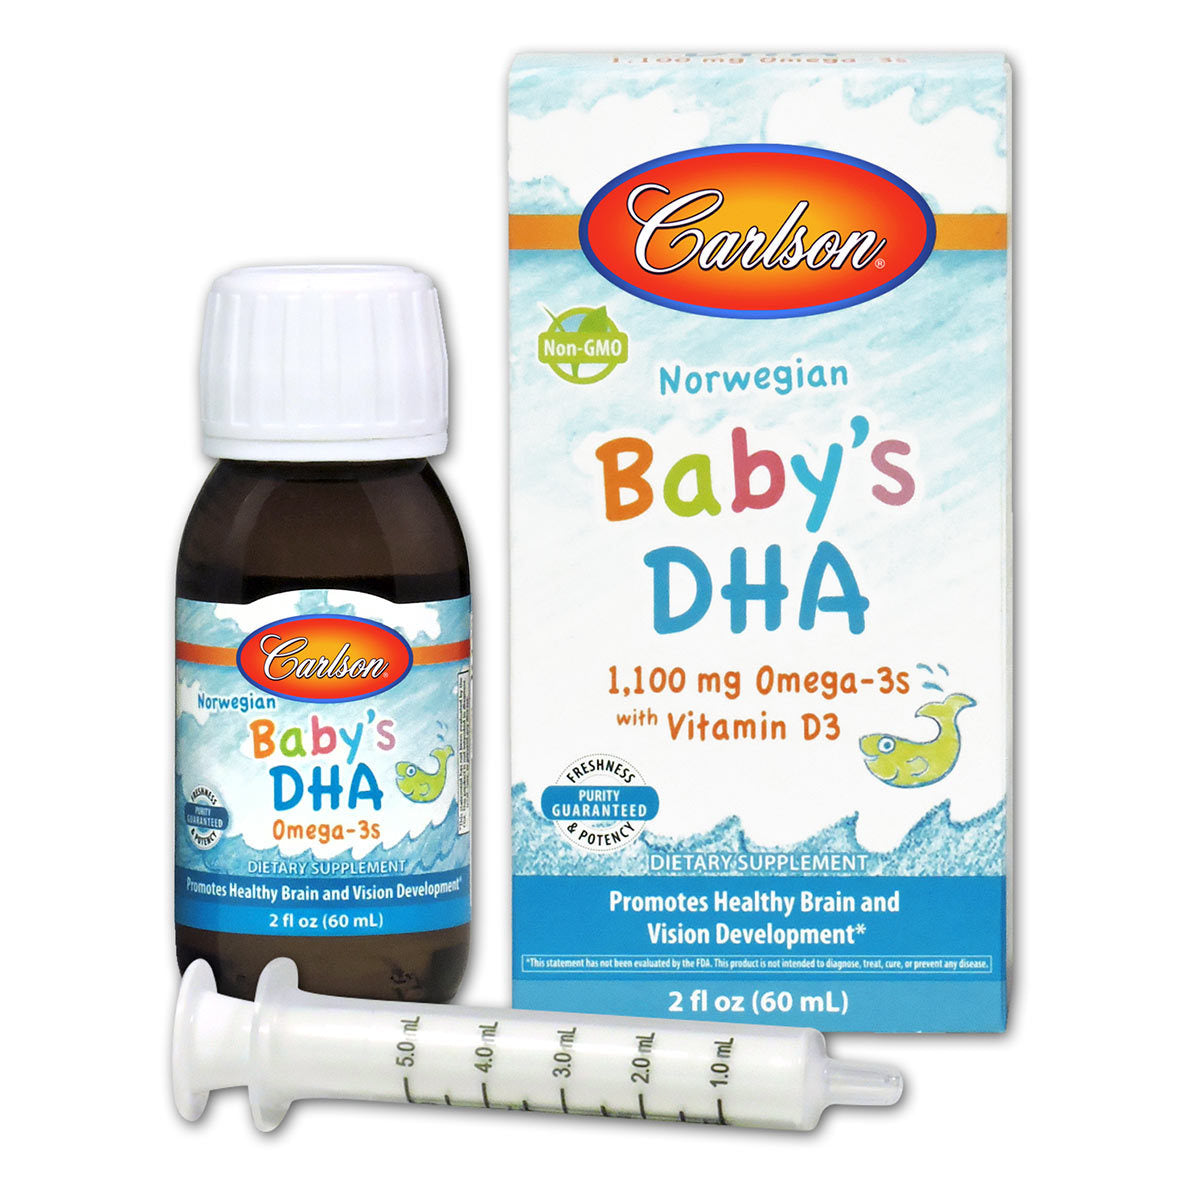 Primary image of Baby's DHA